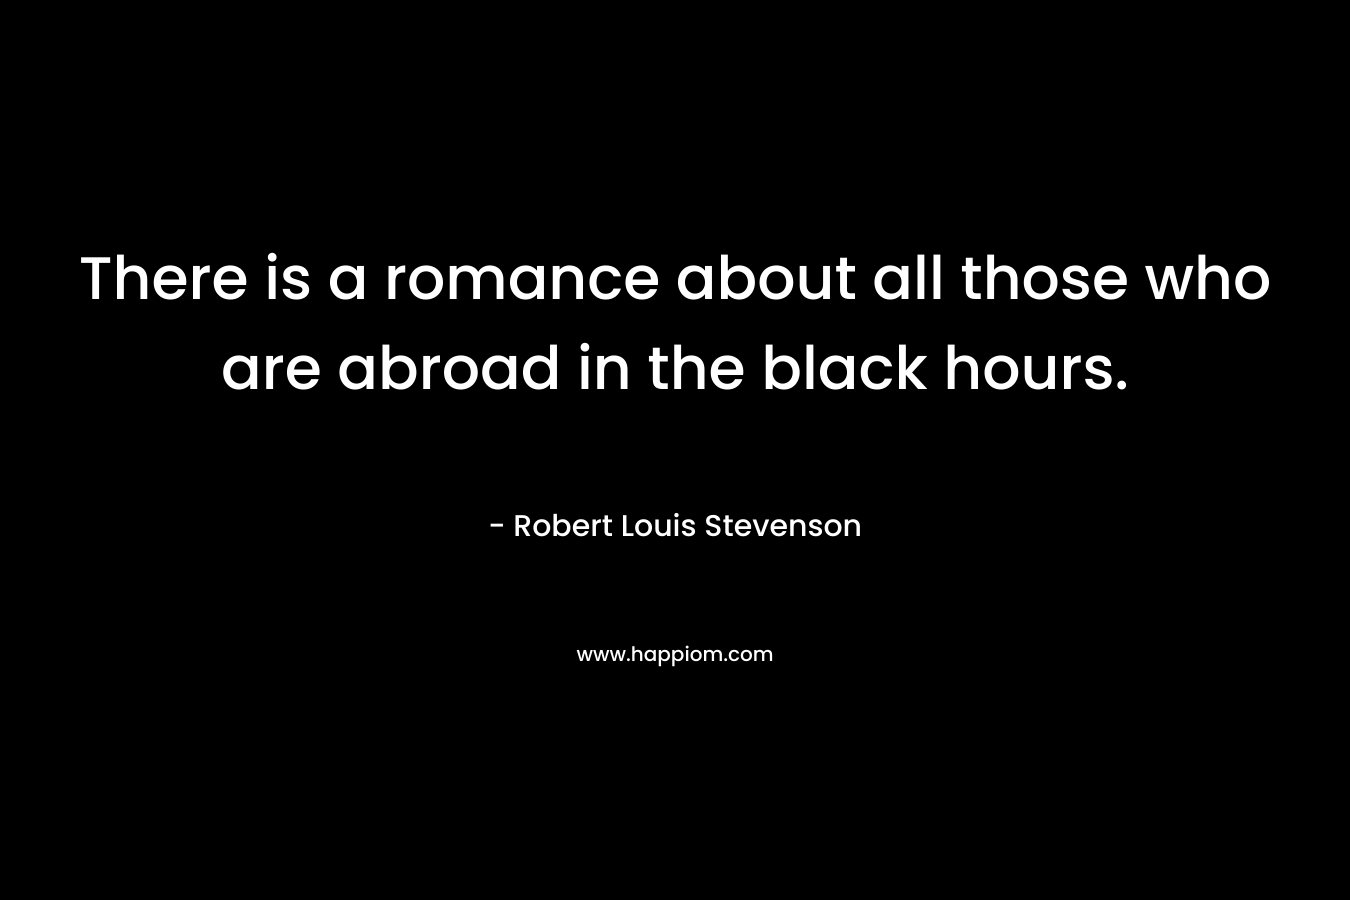 There is a romance about all those who are abroad in the black hours. – Robert Louis Stevenson